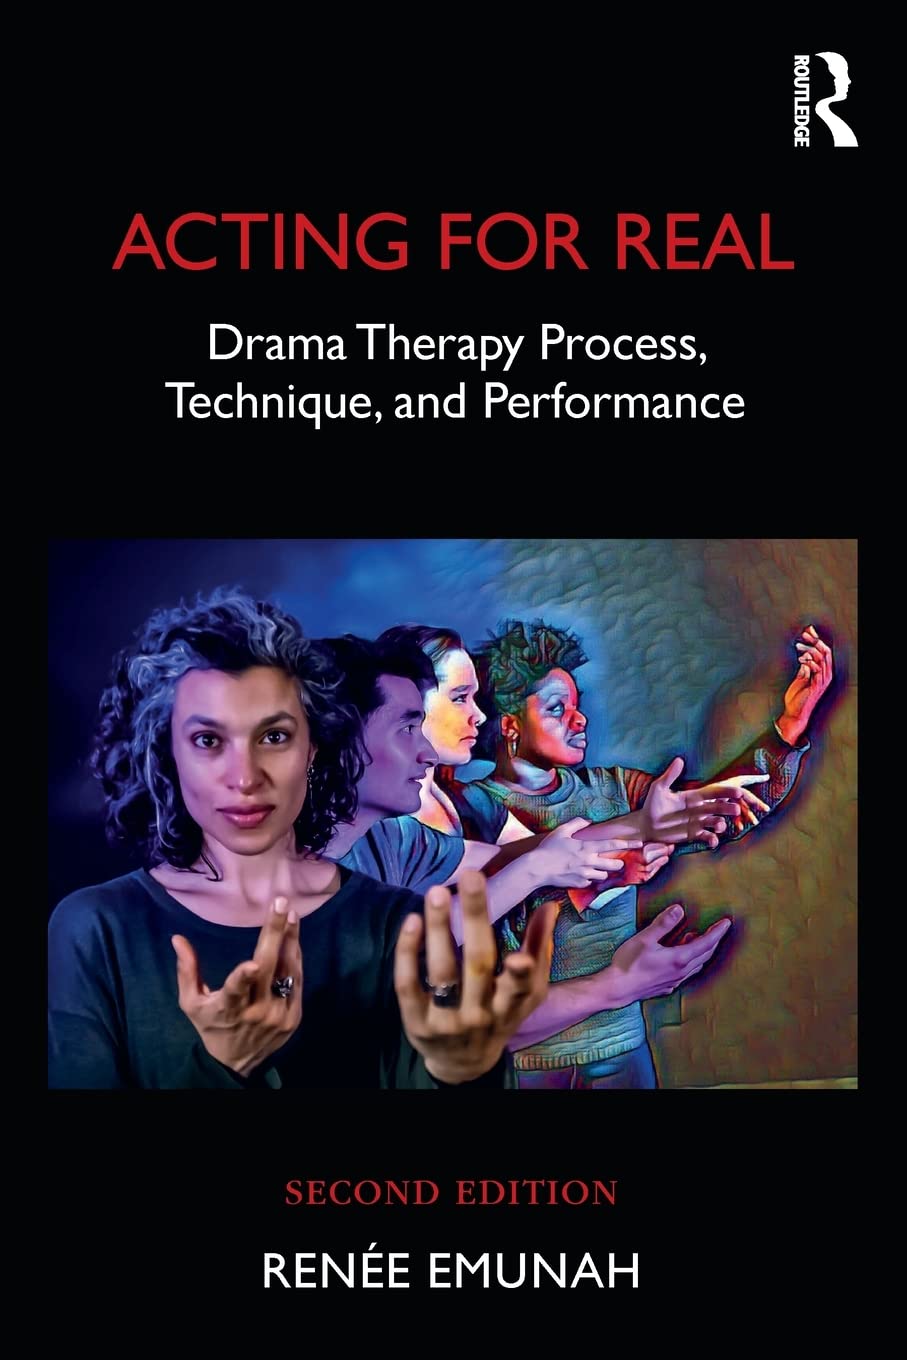 Dr. Renée Emunah's book, Acting For Real: Drama Therapy Process, Technique, and Performance 2nd Edition